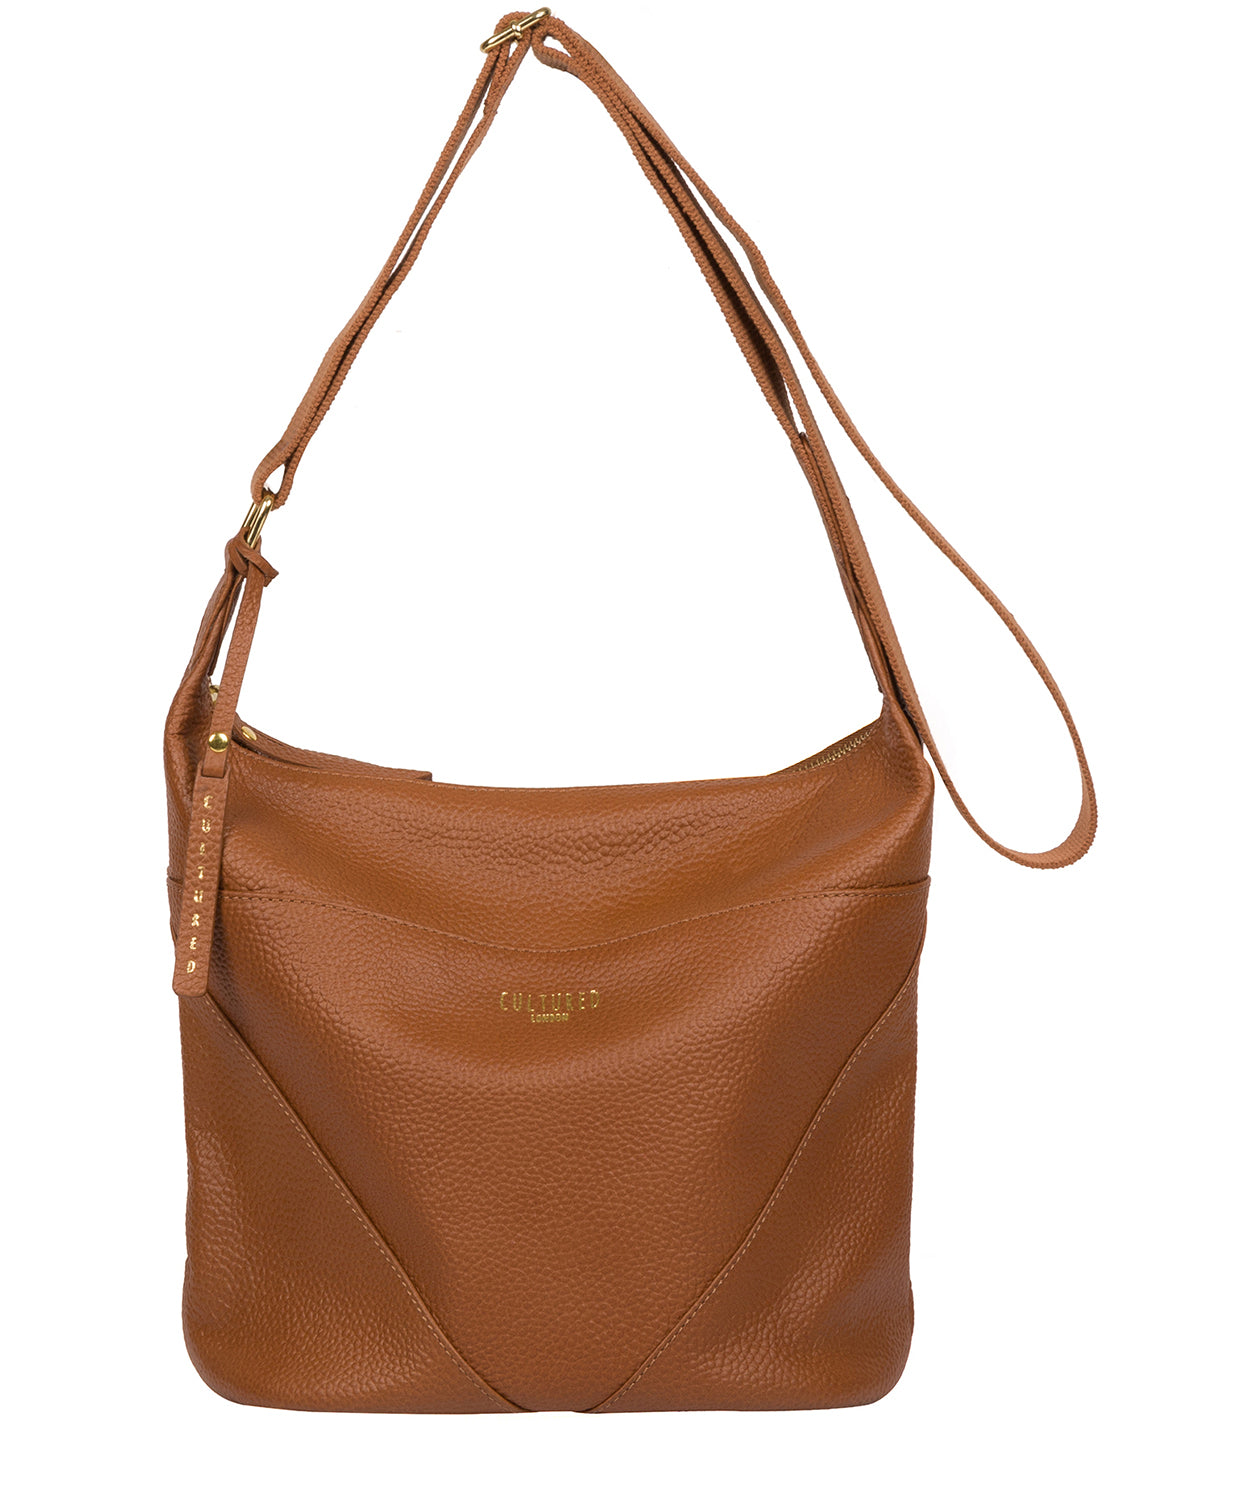 Tan Leather Shoulder Bag 'Olsen' by Cultured London – Pure Luxuries London